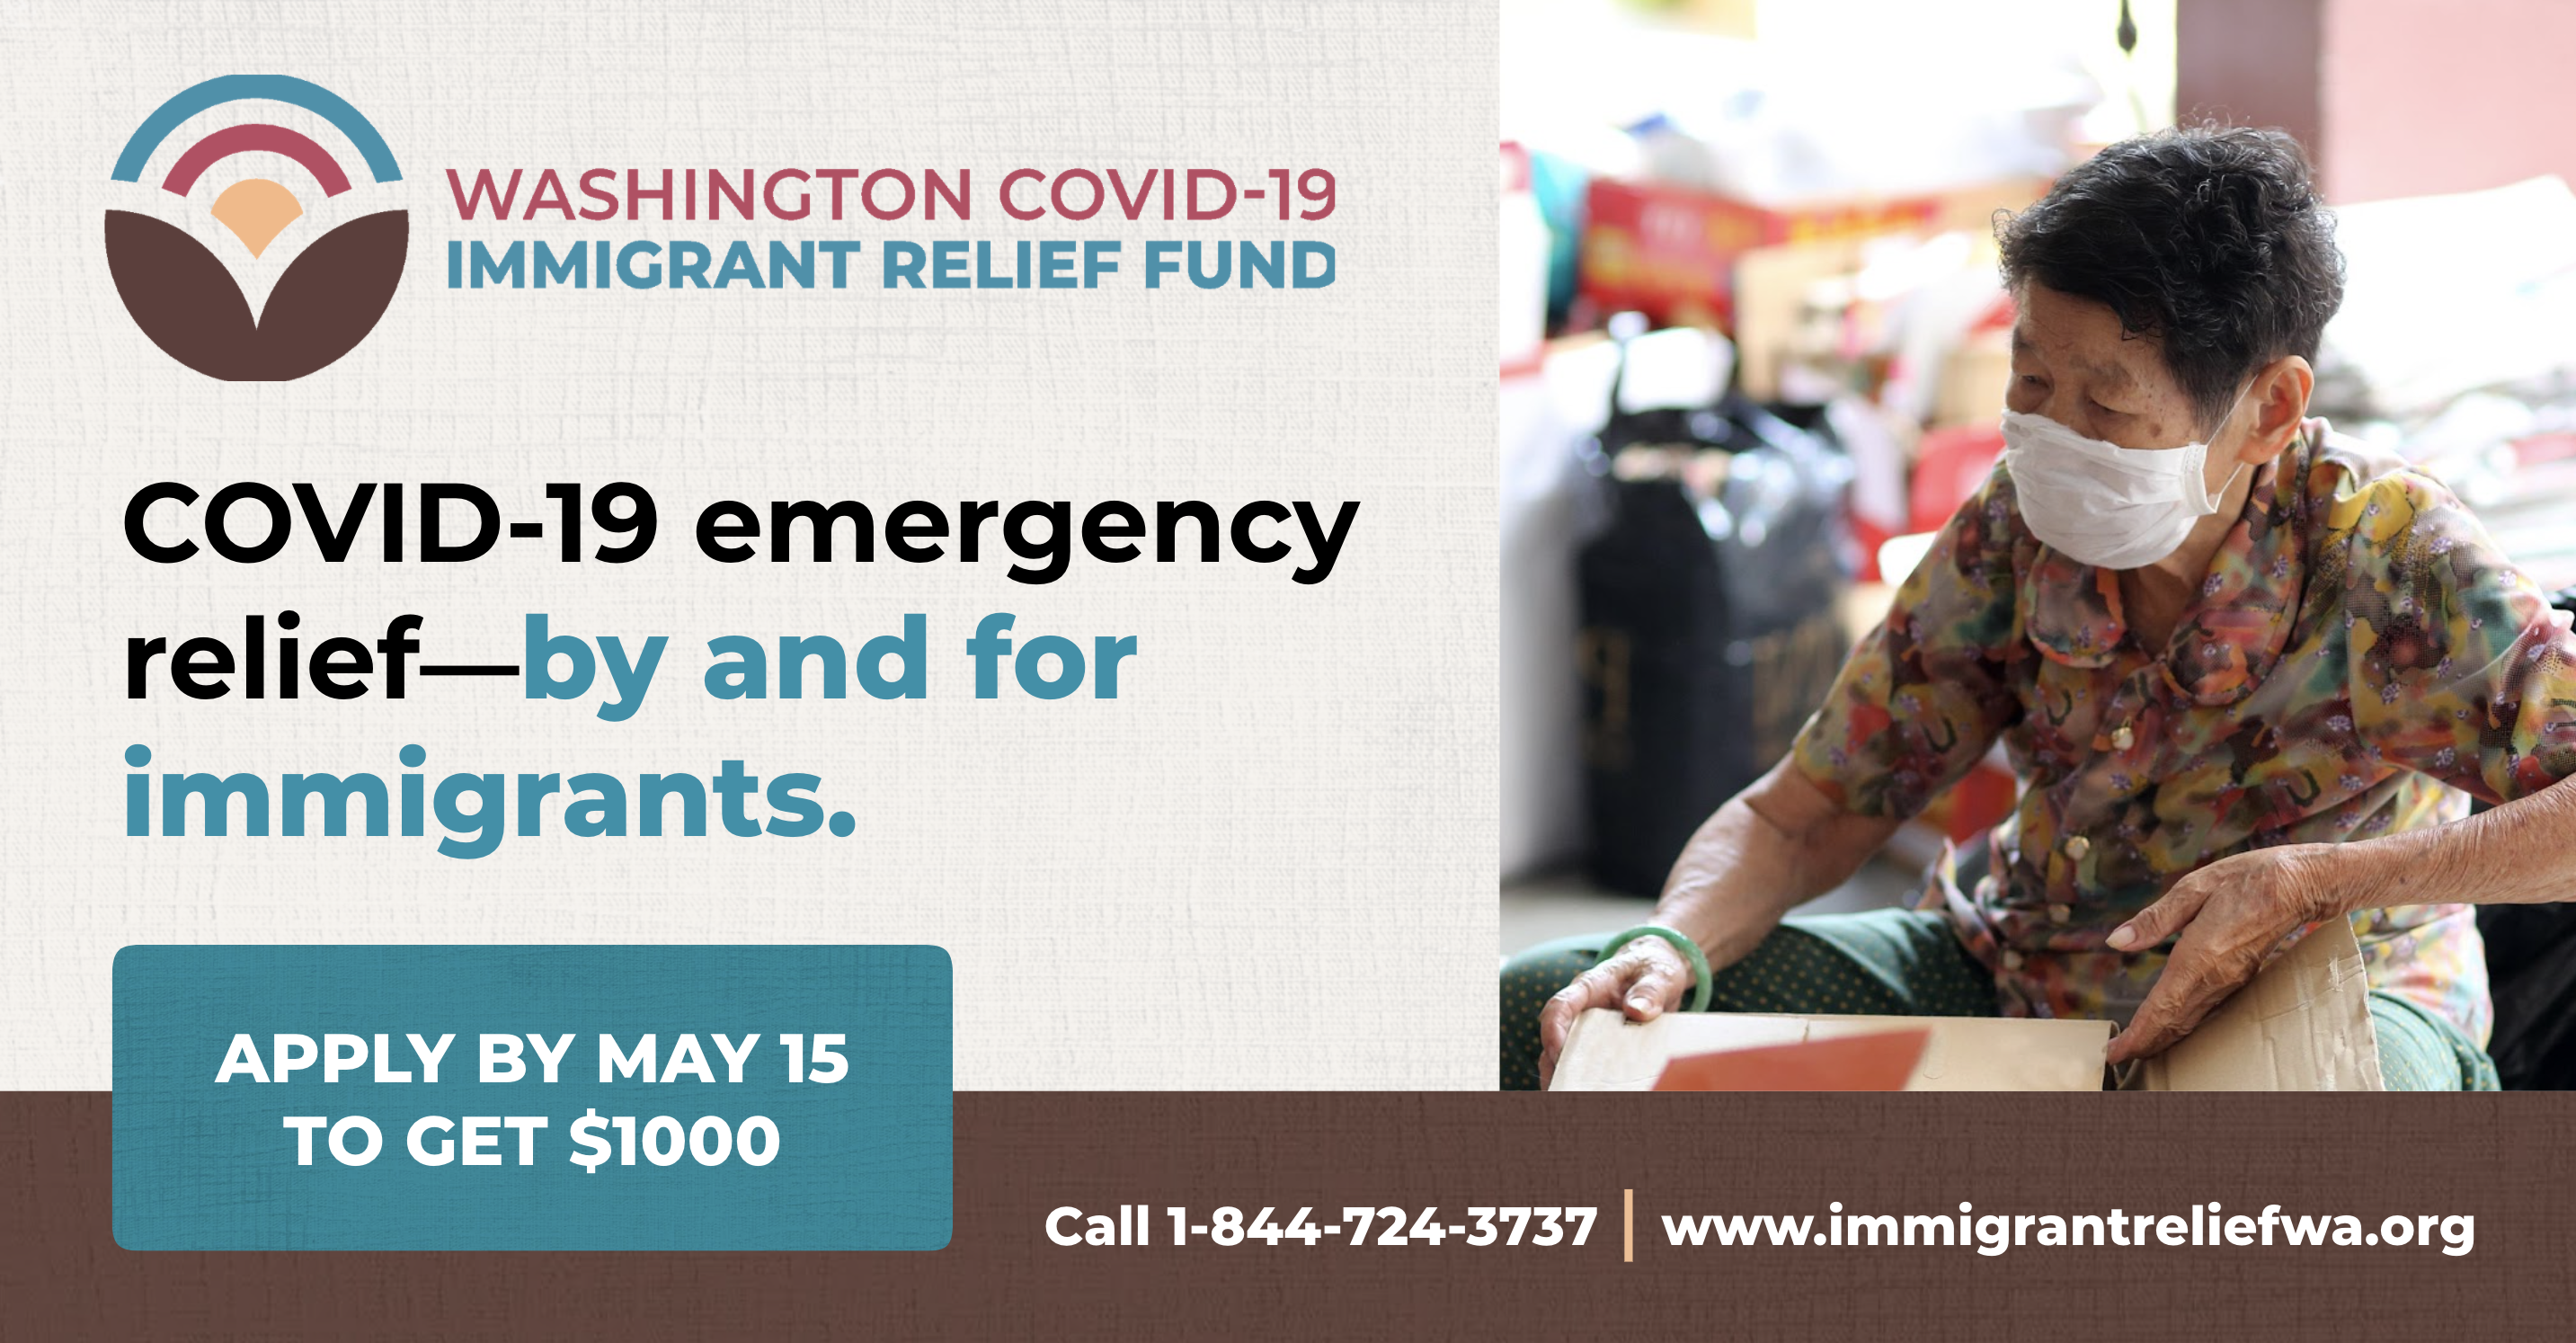 COVID-19 Immigrant Relief Fund Open for Applications